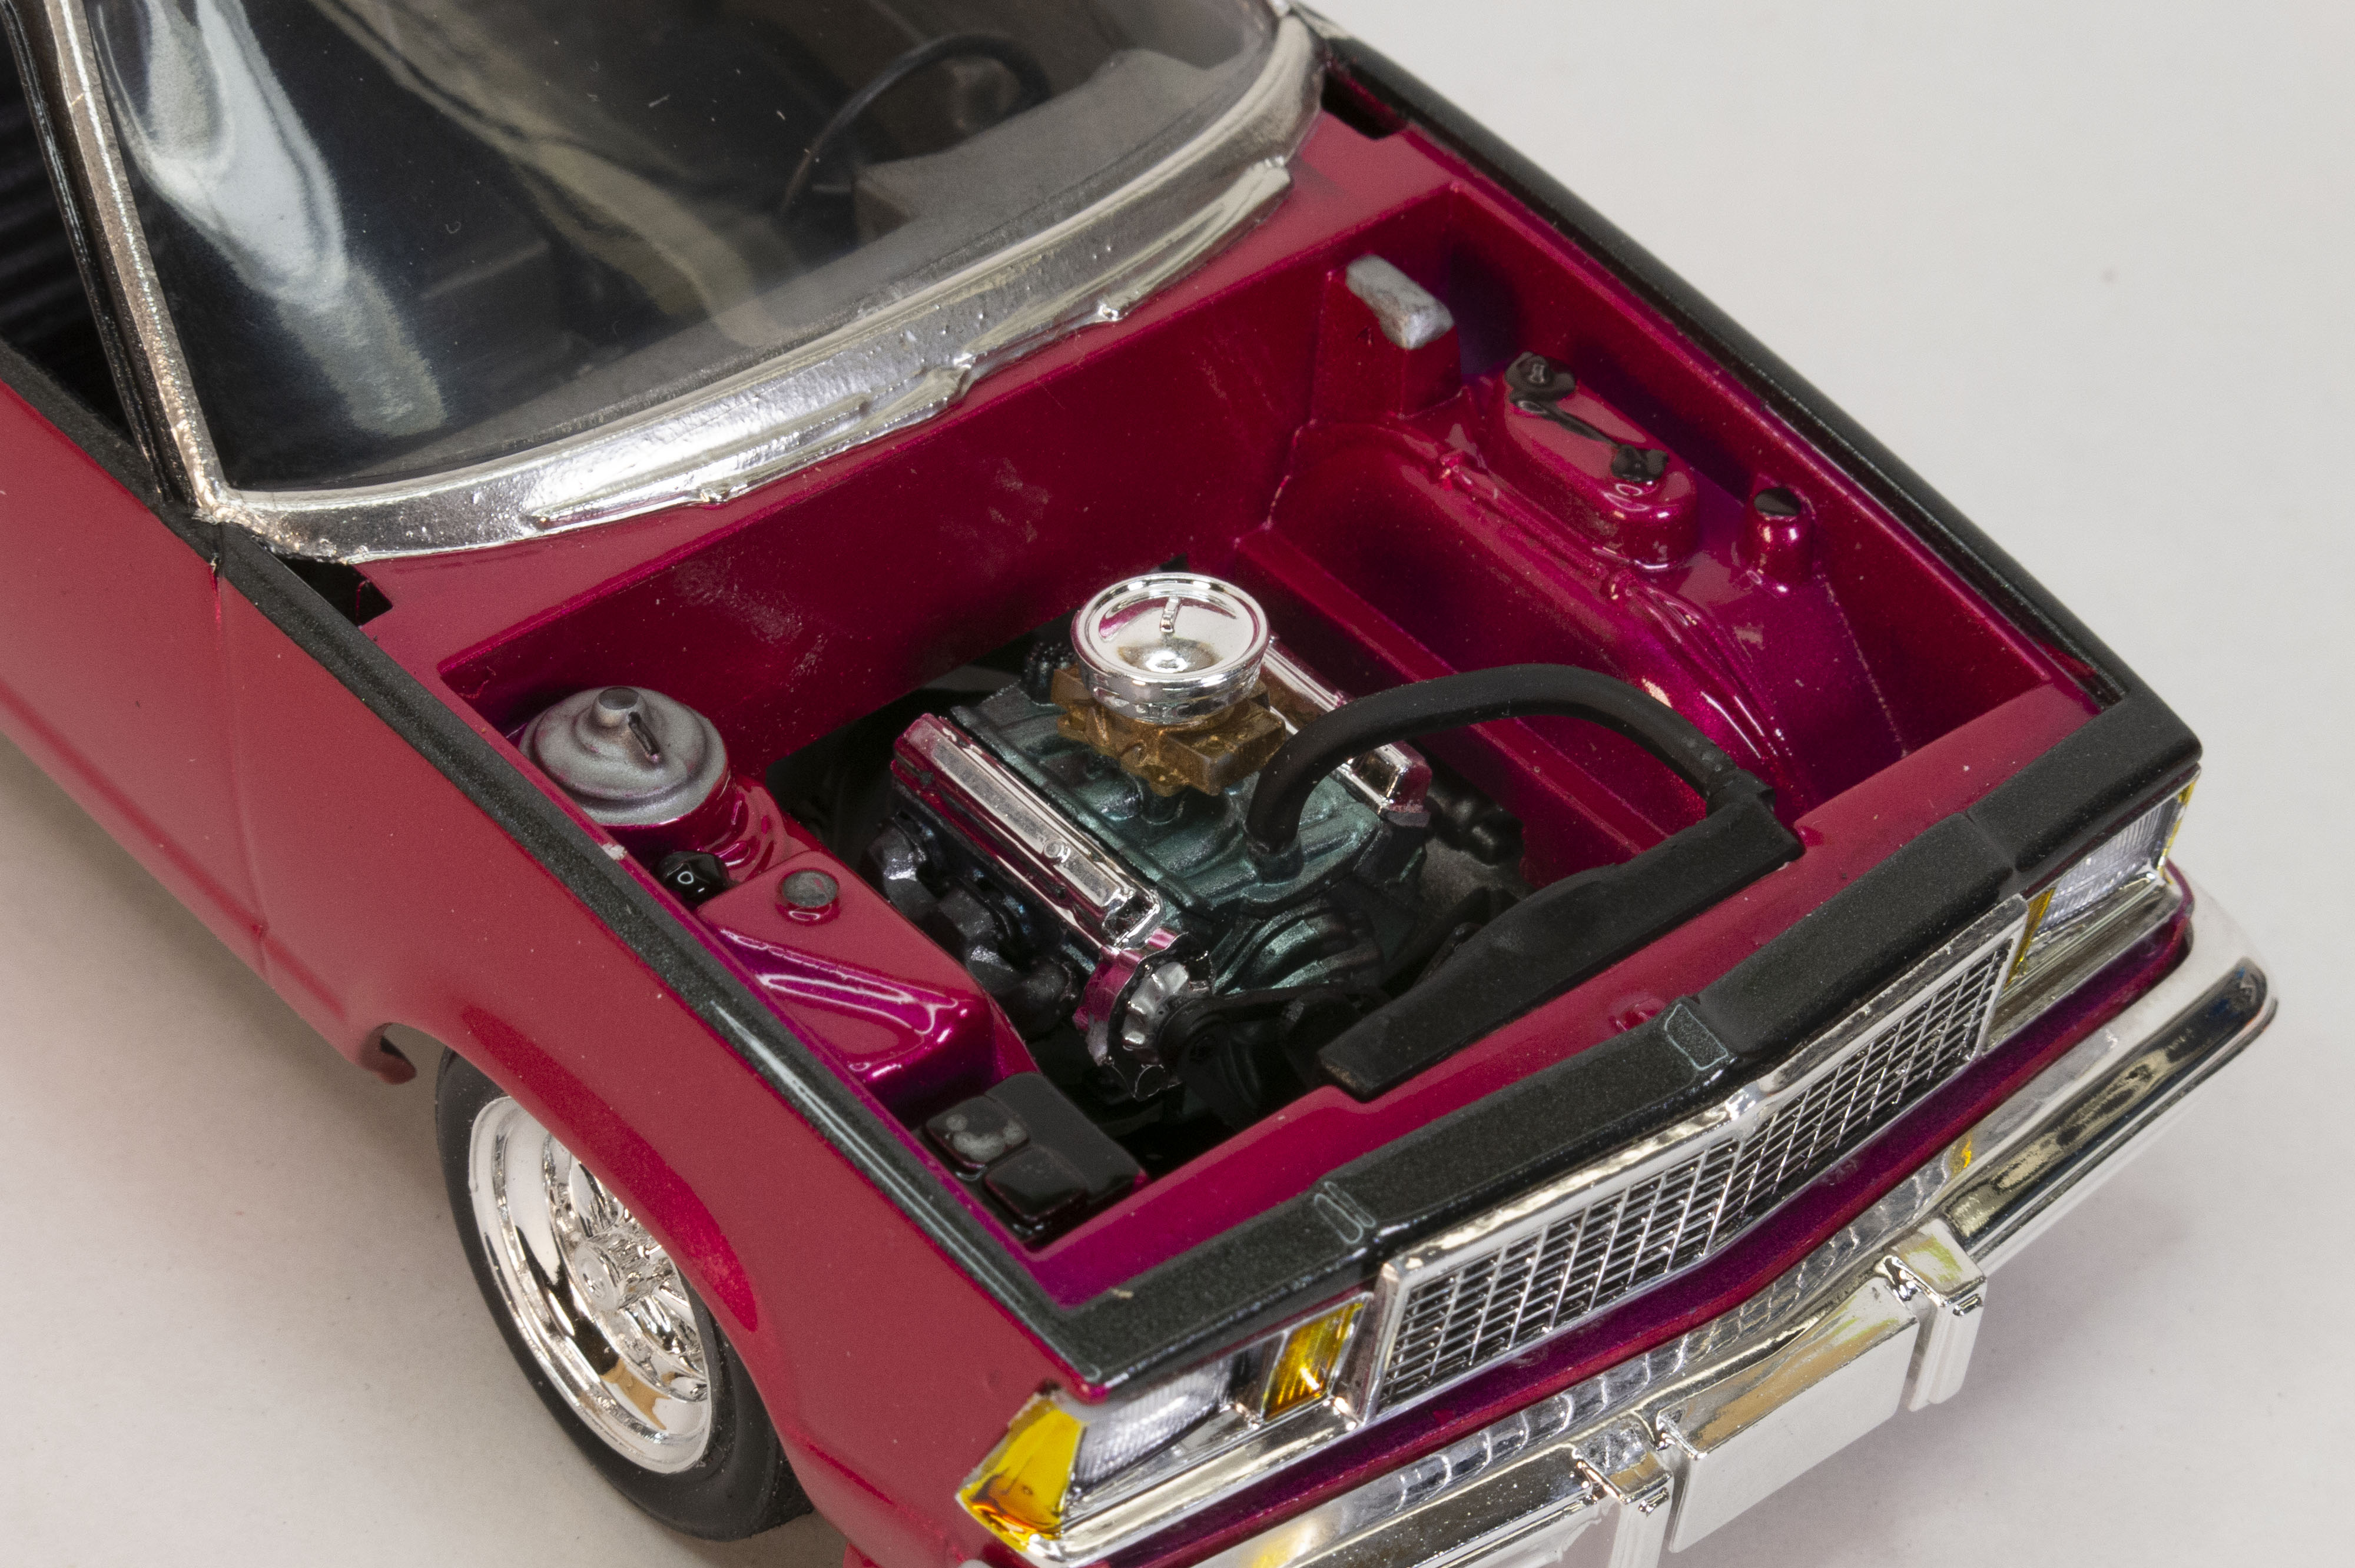 Build review of the Revell Monogram 1978 Chevy El Camino 3 'n 1 